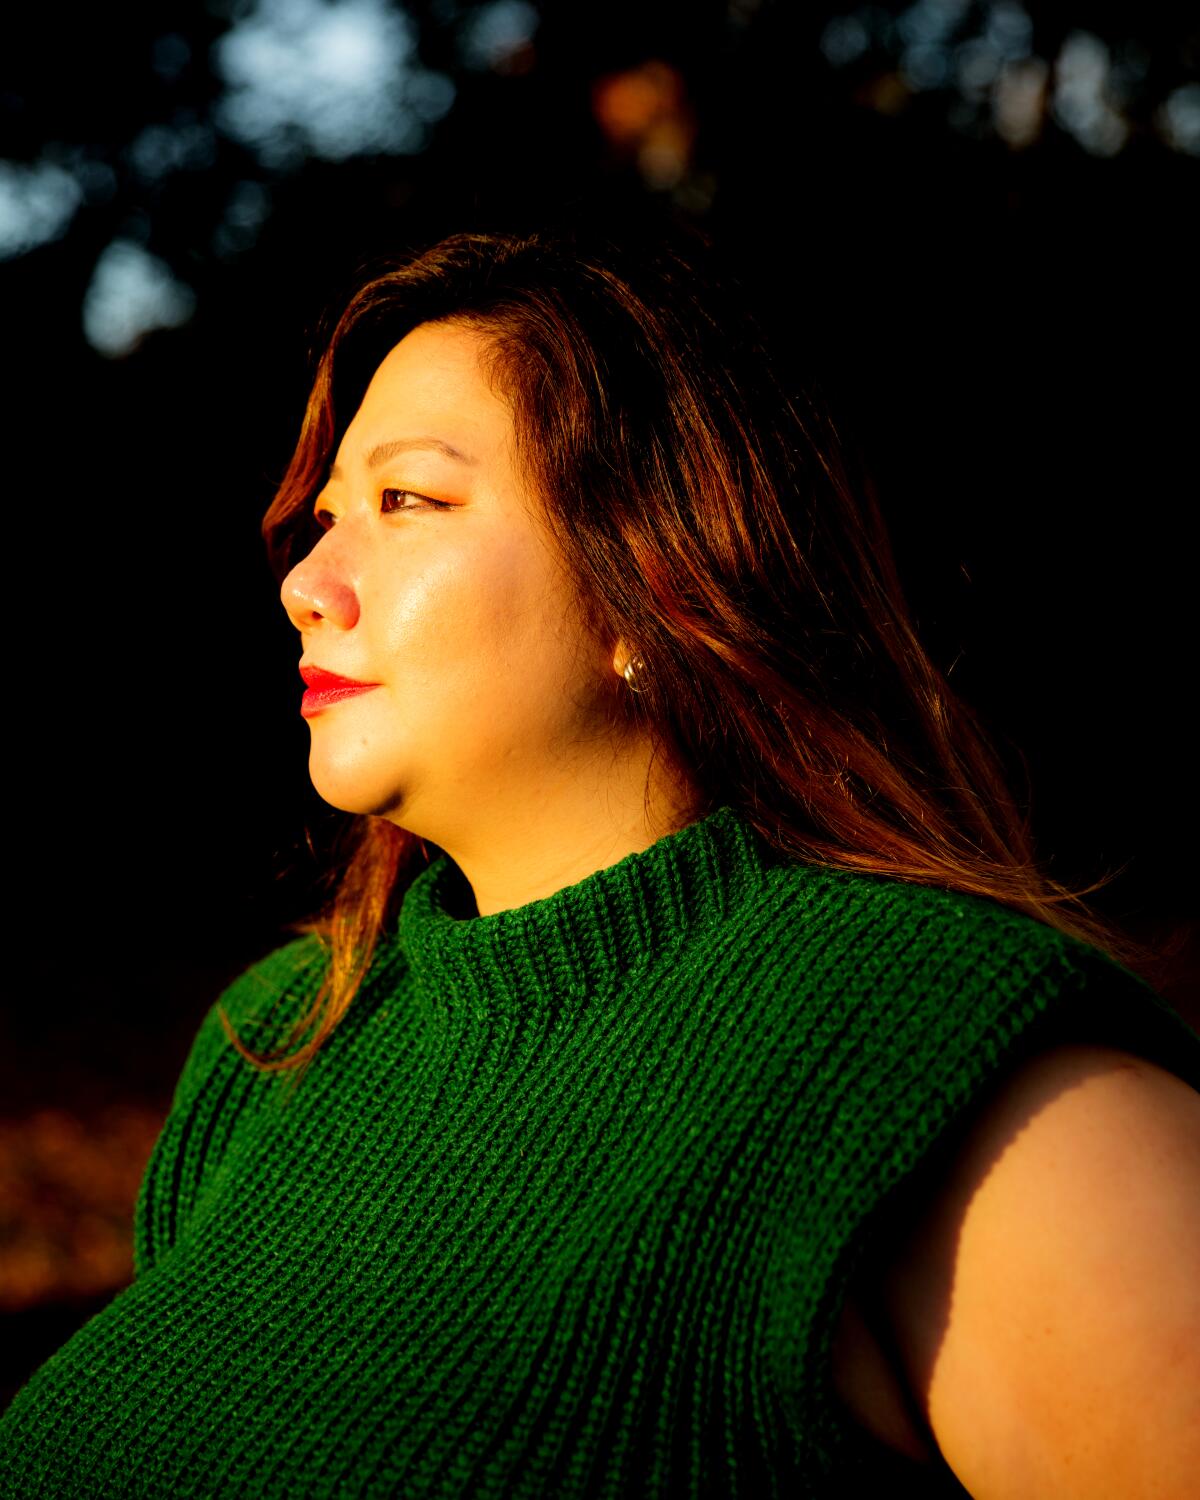 A woman in sunlit profile in a green sleeveless sweater.